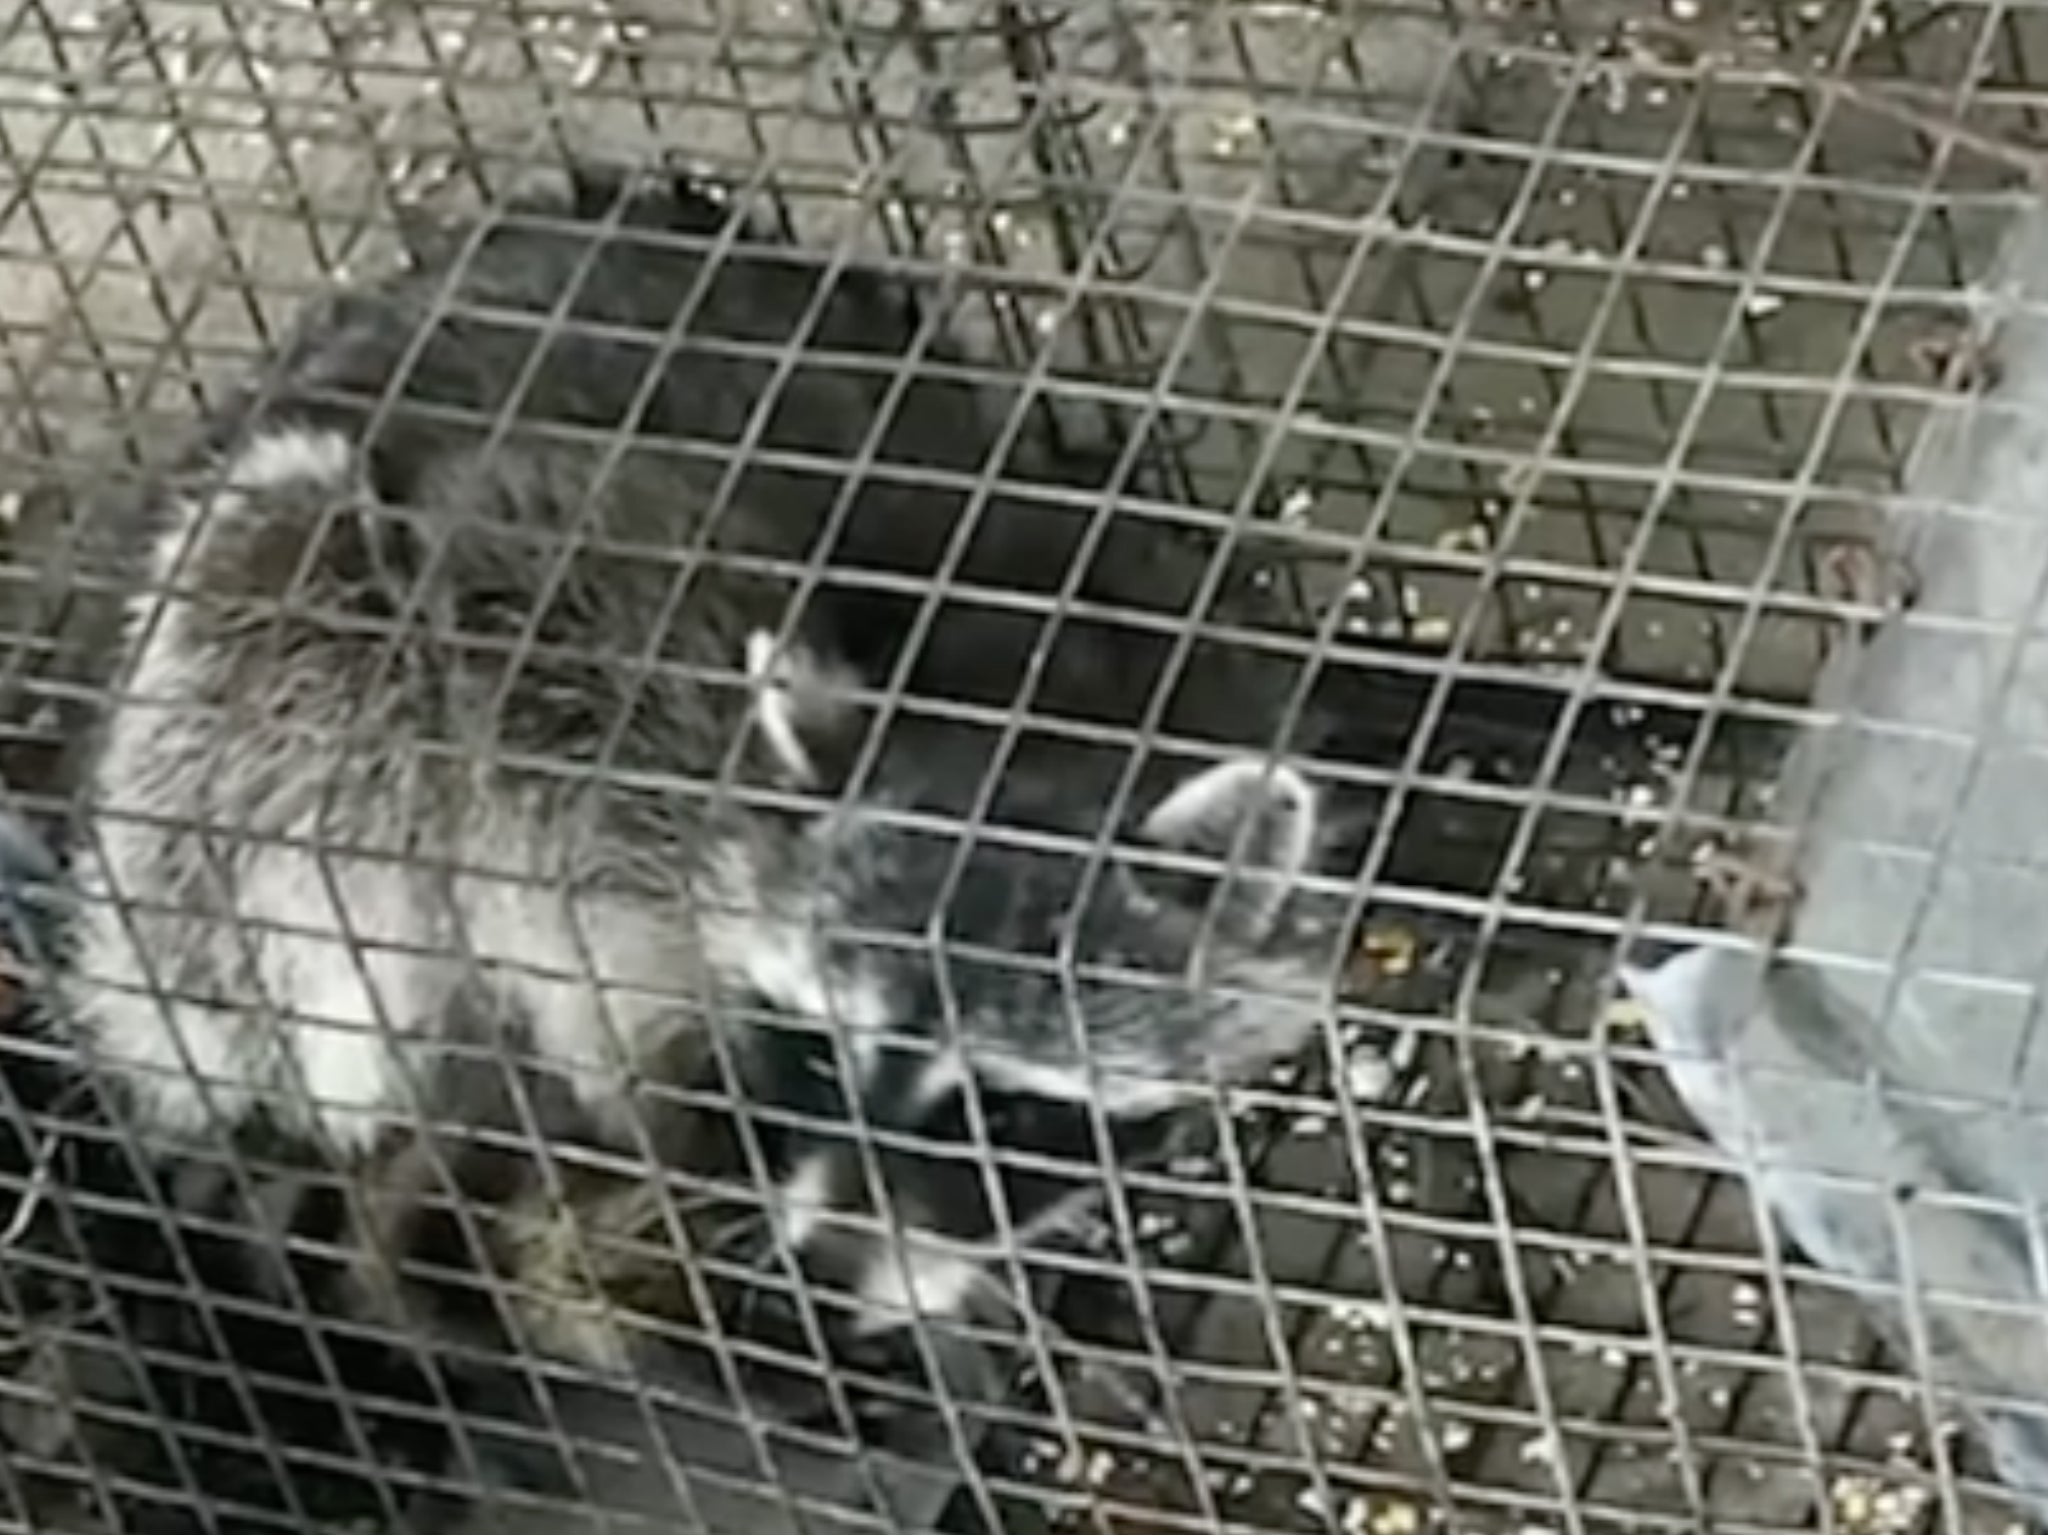 A teacher drowned a wild raccoon with his students but will not be charged with a crime per Florida state law.